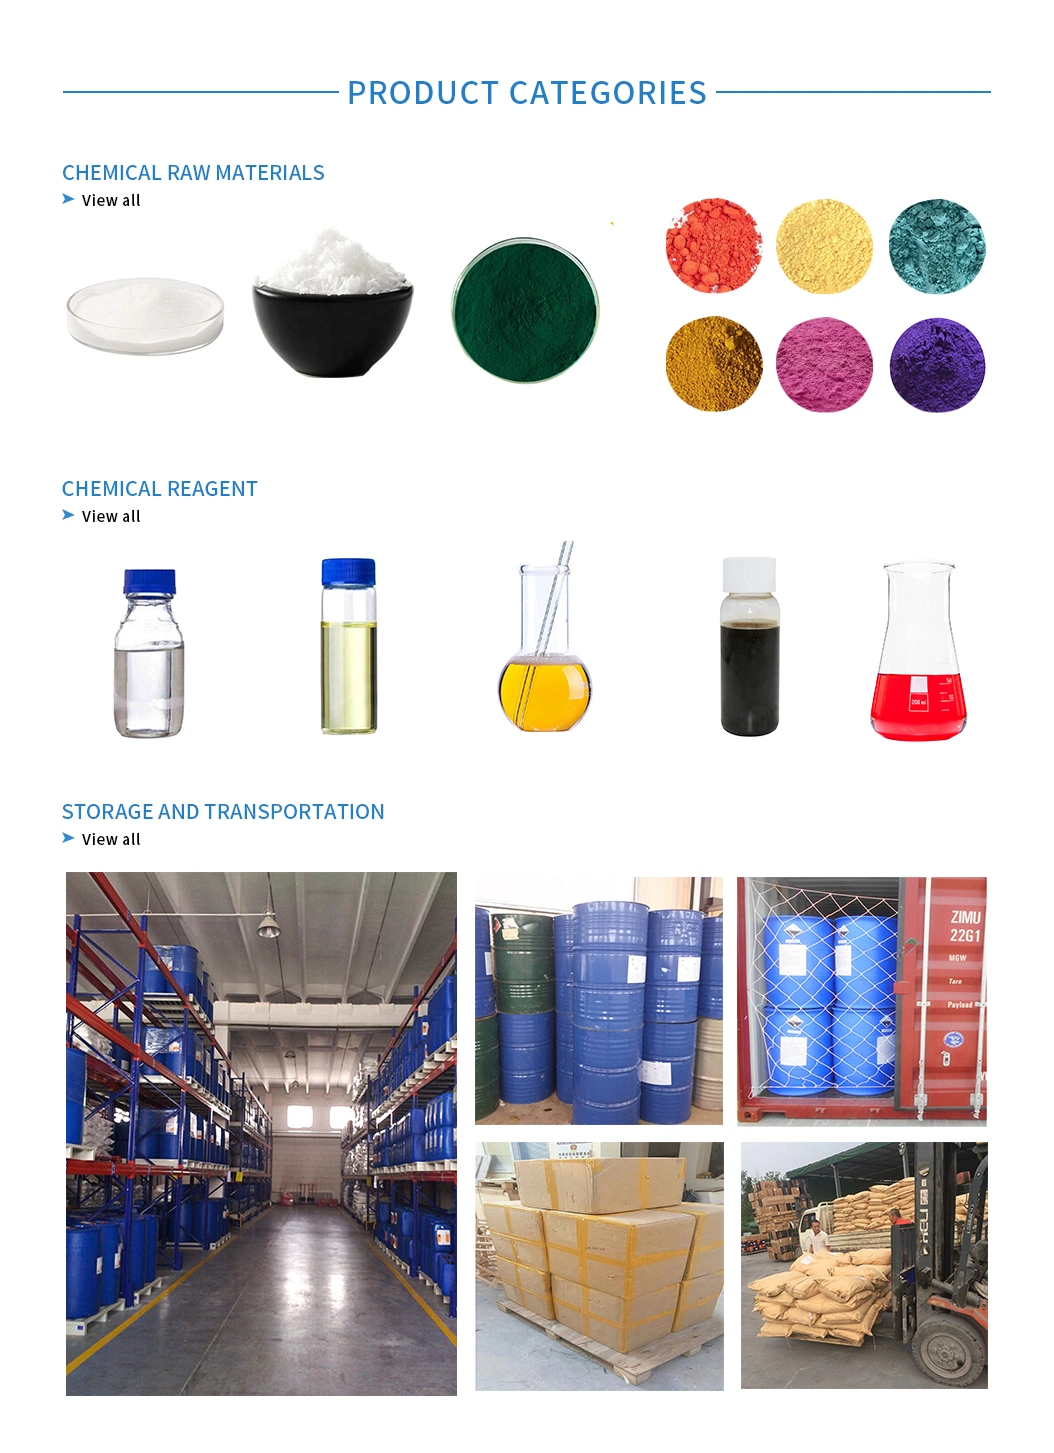 Solvent Green 5 with Coloring of Various Plastics CAS 2744-50-5